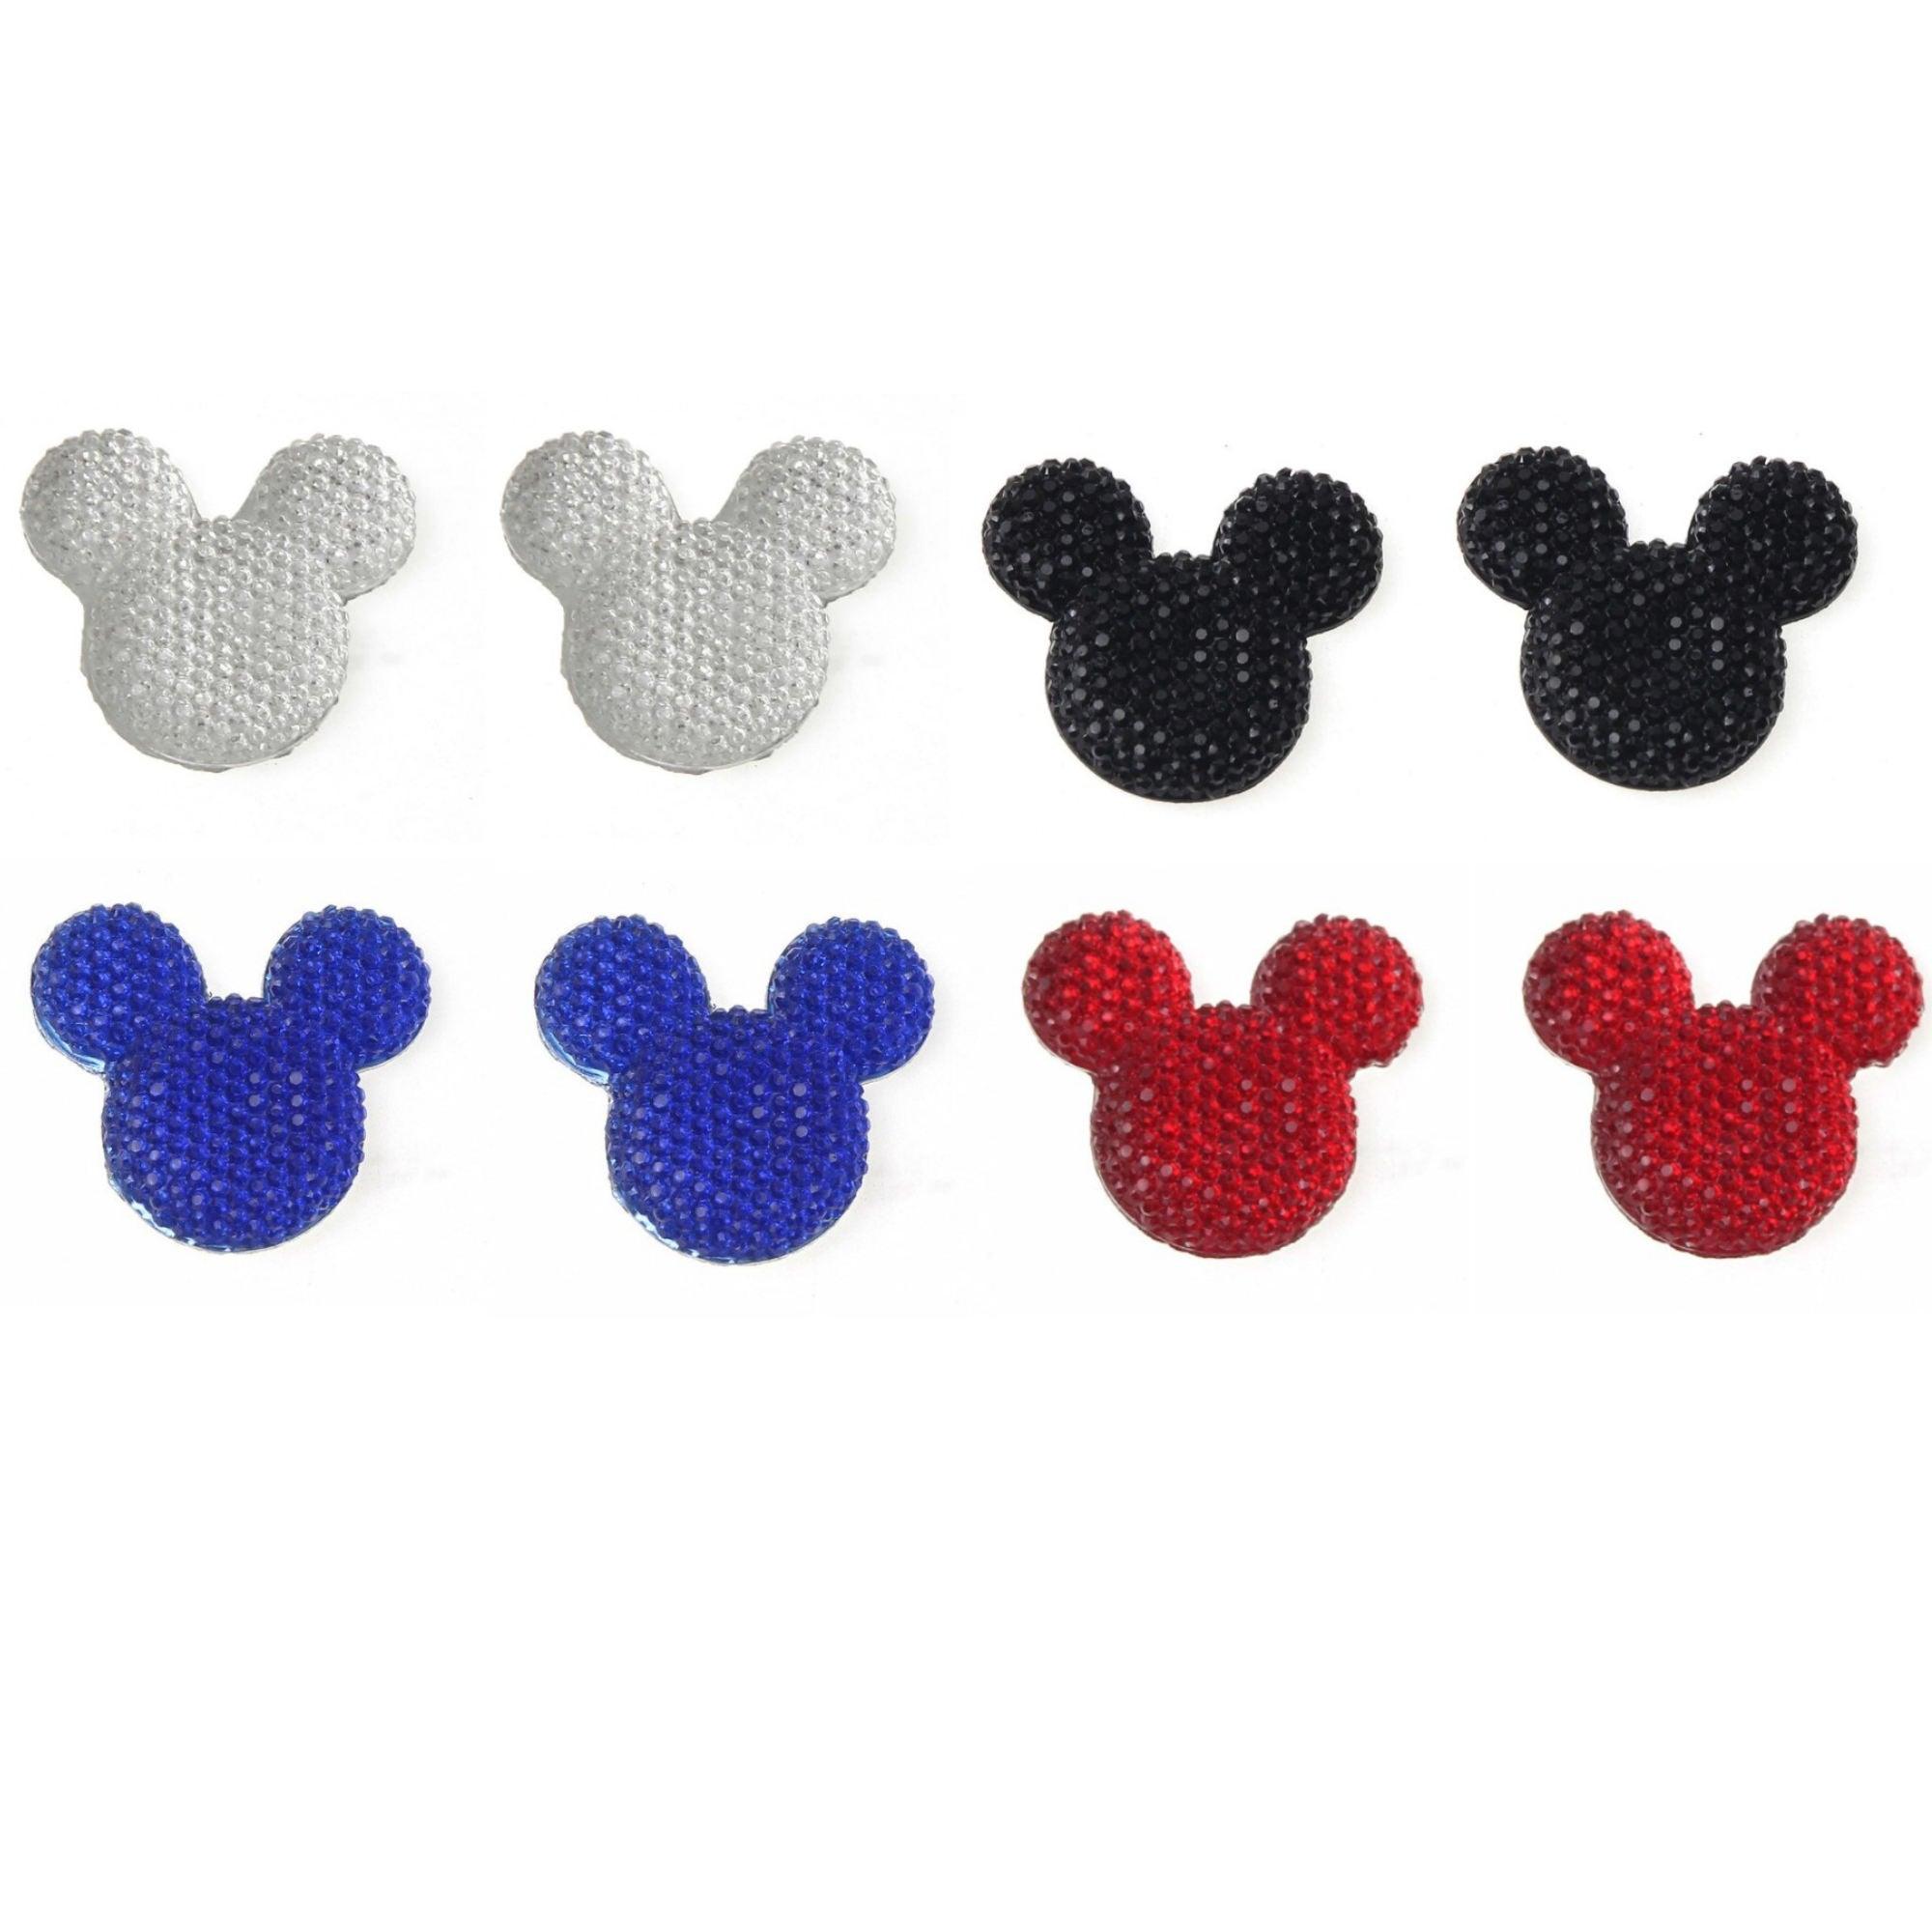 Disneyana Collection 1.25" Bling Variety Mouse Ears Scrapbook Embellishments - 8 Pieces - Scrapbook Supply Companies